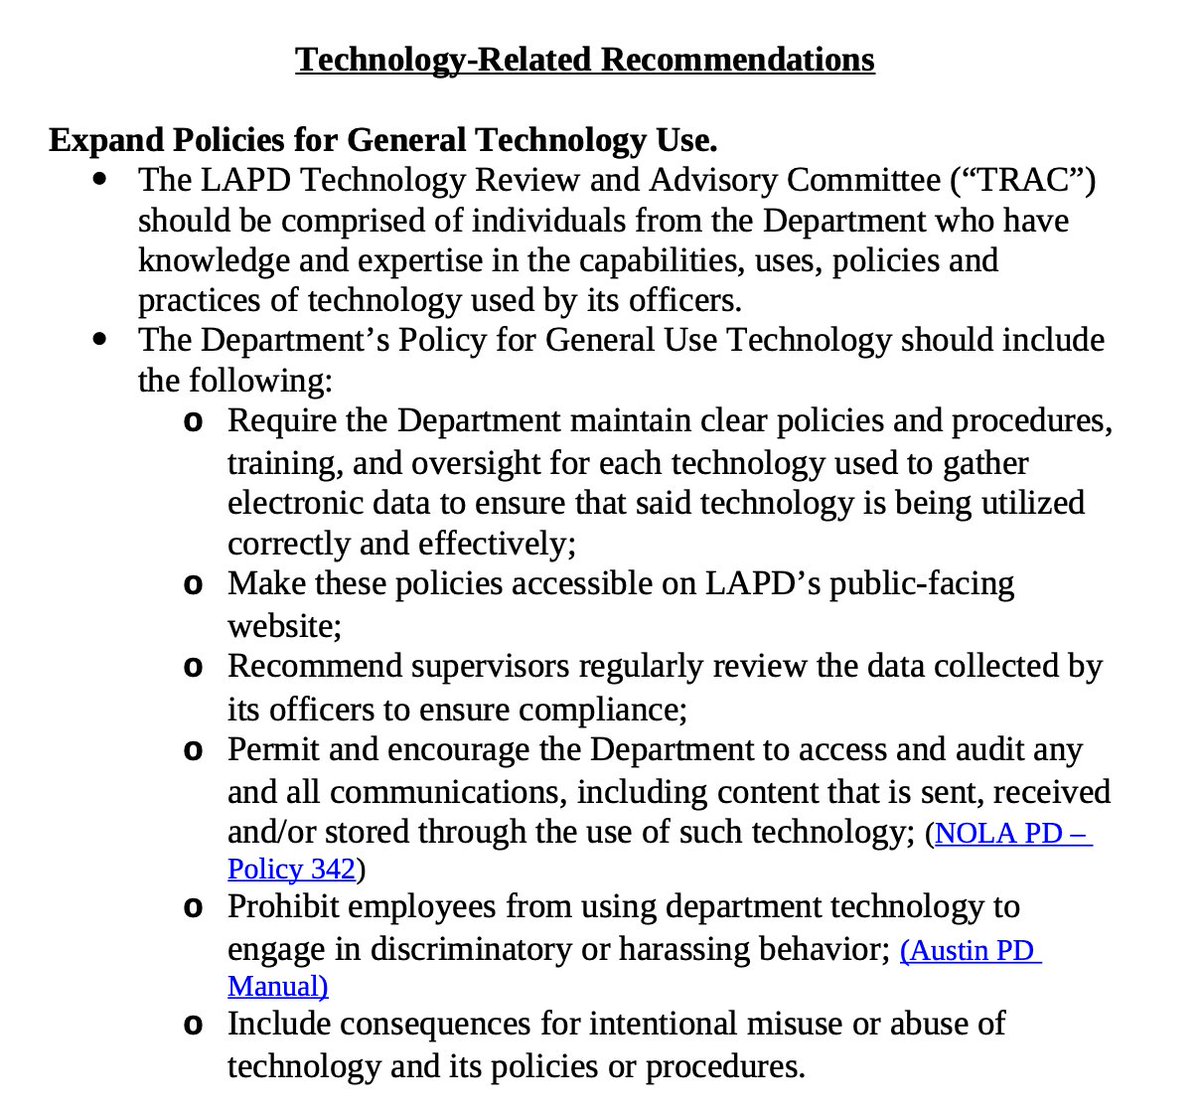 They even propose surveillance bureaucracy laws like what  @STOPSpyingNY enacted this summer in New York and  @ACLU is pushing nationally ( https://www.aclu.org/legal-document/community-control-over-police-surveillance-ccops-model-bill)